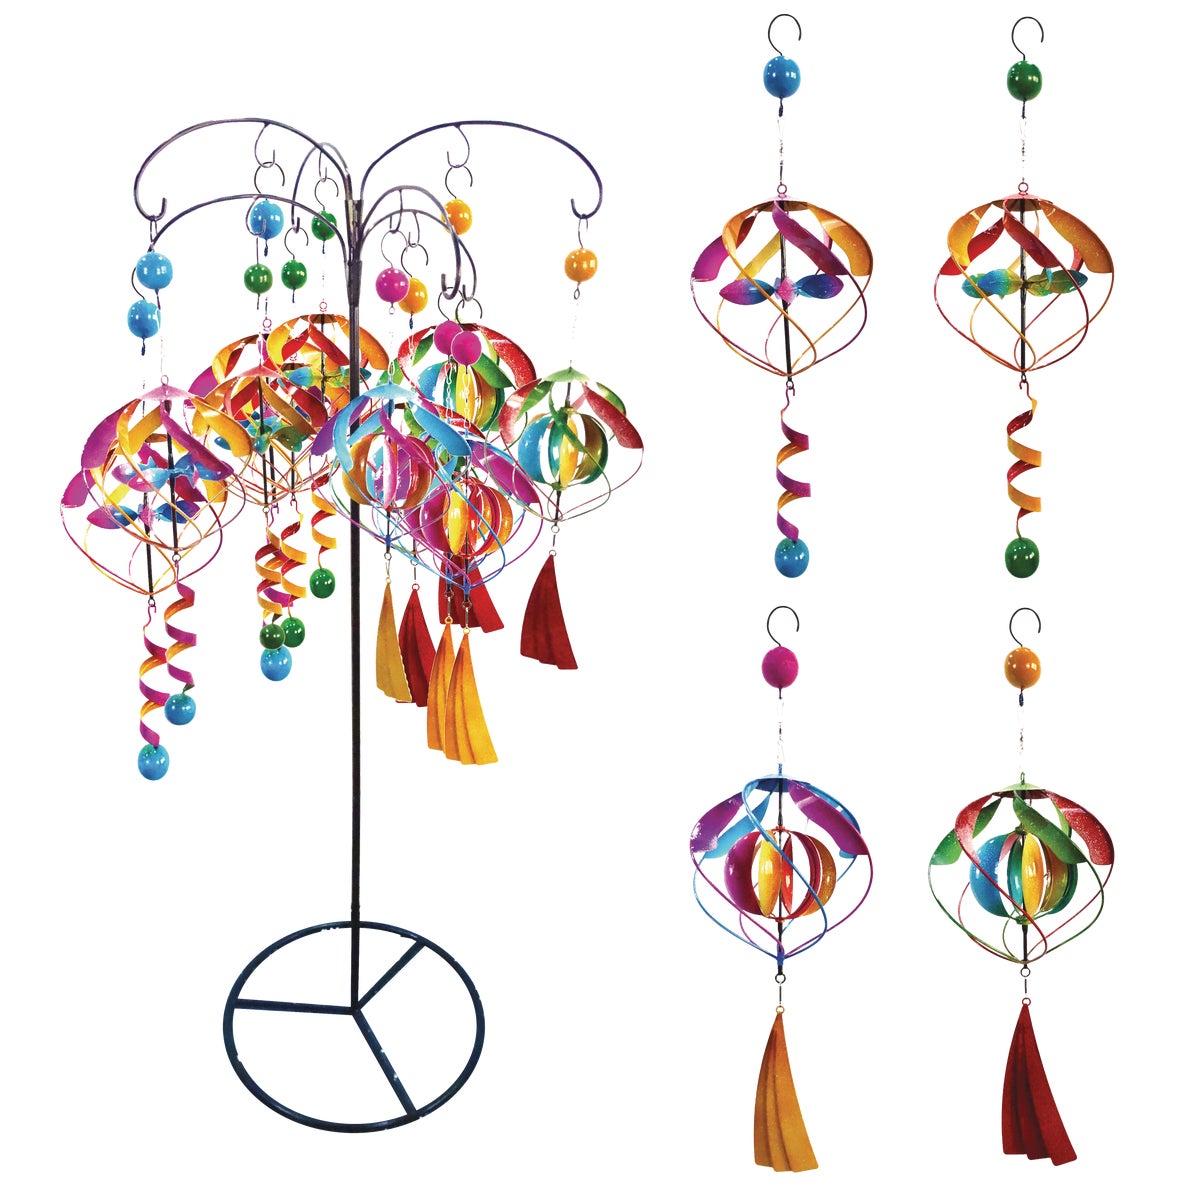 Alpine 17 In. H. Multi-Color Iron Glamorous Hanging Wind Spinner Display (12-Piece)